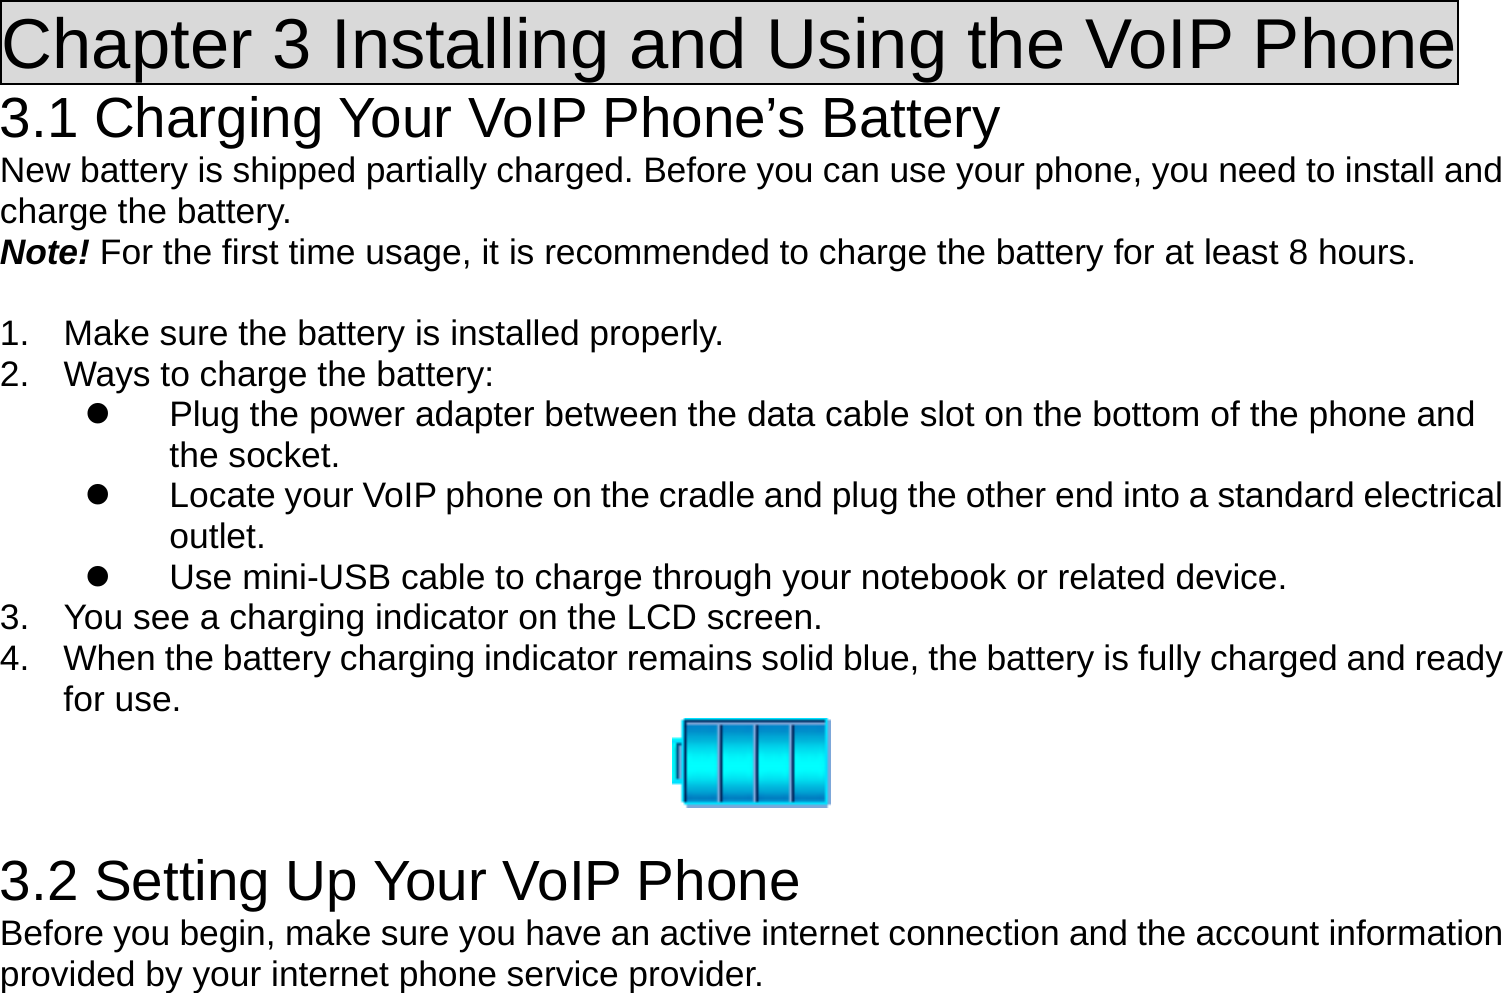 Chapter 3 Installing and Using the VoIP Phone 3.1 Charging Your VoIP Phone’s Battery New battery is shipped partially charged. Before you can use your phone, you need to install and charge the battery. Note! For the first time usage, it is recommended to charge the battery for at least 8 hours.  1.  Make sure the battery is installed properly. 2.  Ways to charge the battery:   Plug the power adapter between the data cable slot on the bottom of the phone and the socket.   Locate your VoIP phone on the cradle and plug the other end into a standard electrical outlet.   Use mini-USB cable to charge through your notebook or related device. 3.  You see a charging indicator on the LCD screen. 4.  When the battery charging indicator remains solid blue, the battery is fully charged and ready for use.    3.2 Setting Up Your VoIP Phone Before you begin, make sure you have an active internet connection and the account information provided by your internet phone service provider. 